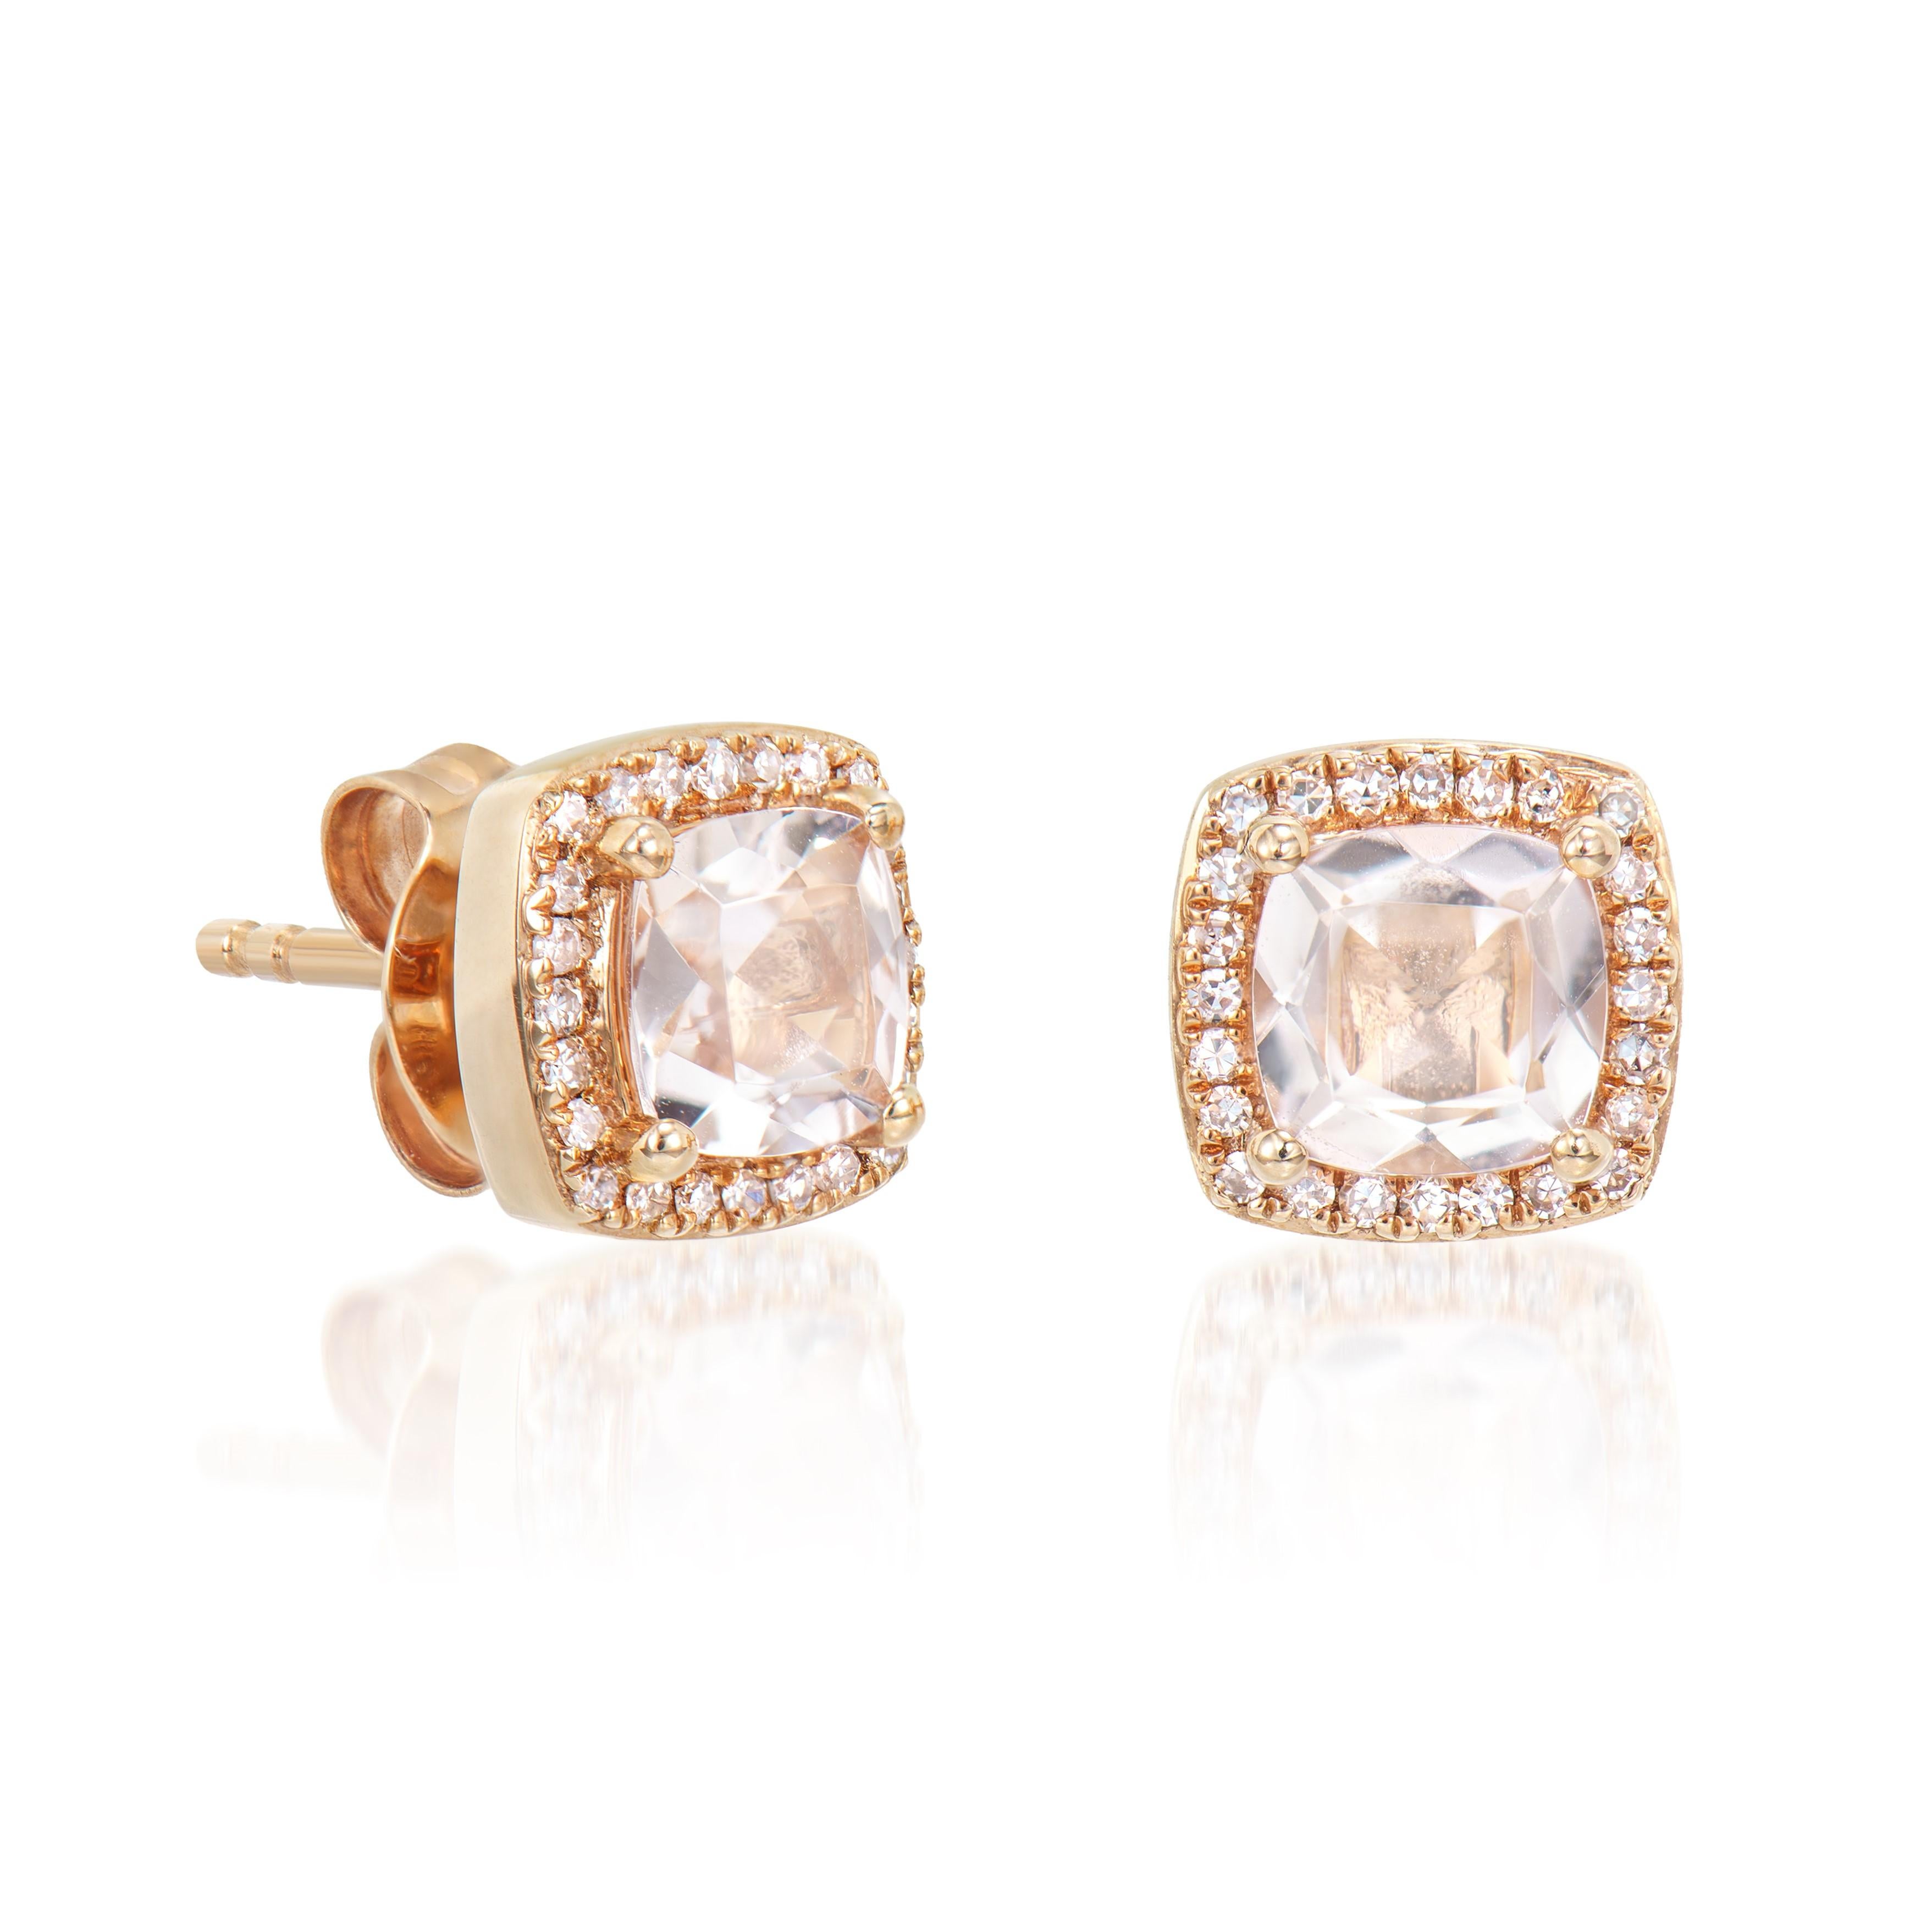 Presented A lovely collection of gems, including Amethyst, Peridot, Rhodolite, Sky Blue Topaz, Swiss Blue Topaz and Morganite is perfect for people who value quality and want to wear it to any occasion or celebration. The rose gold Morganite